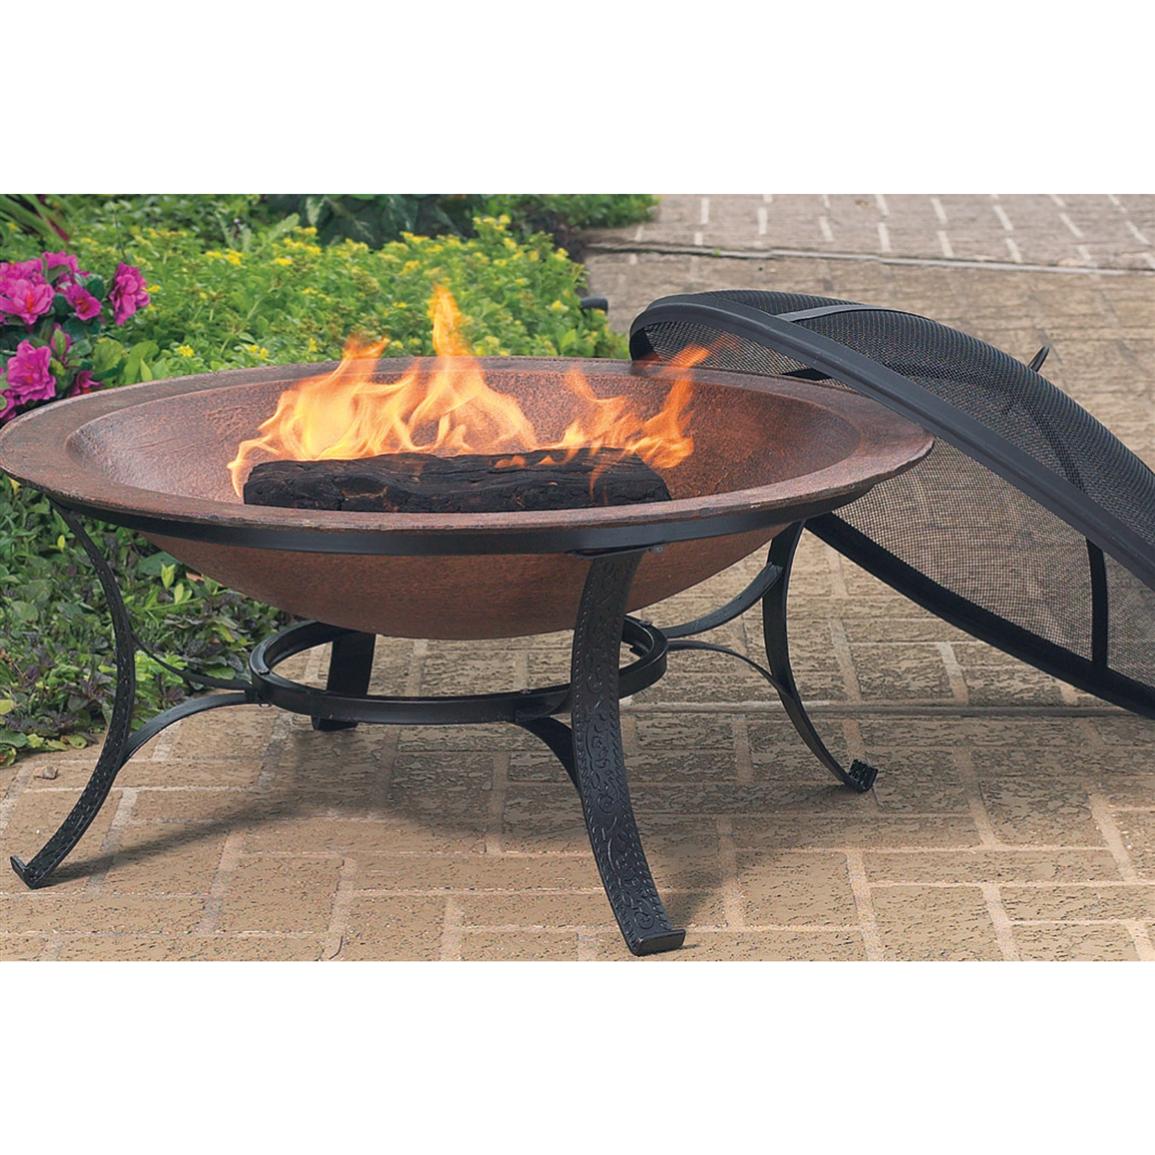 CobraCo® Copper Fire Pit - 175260, Fire Pits & Patio Heaters at Sportsman's  Guide